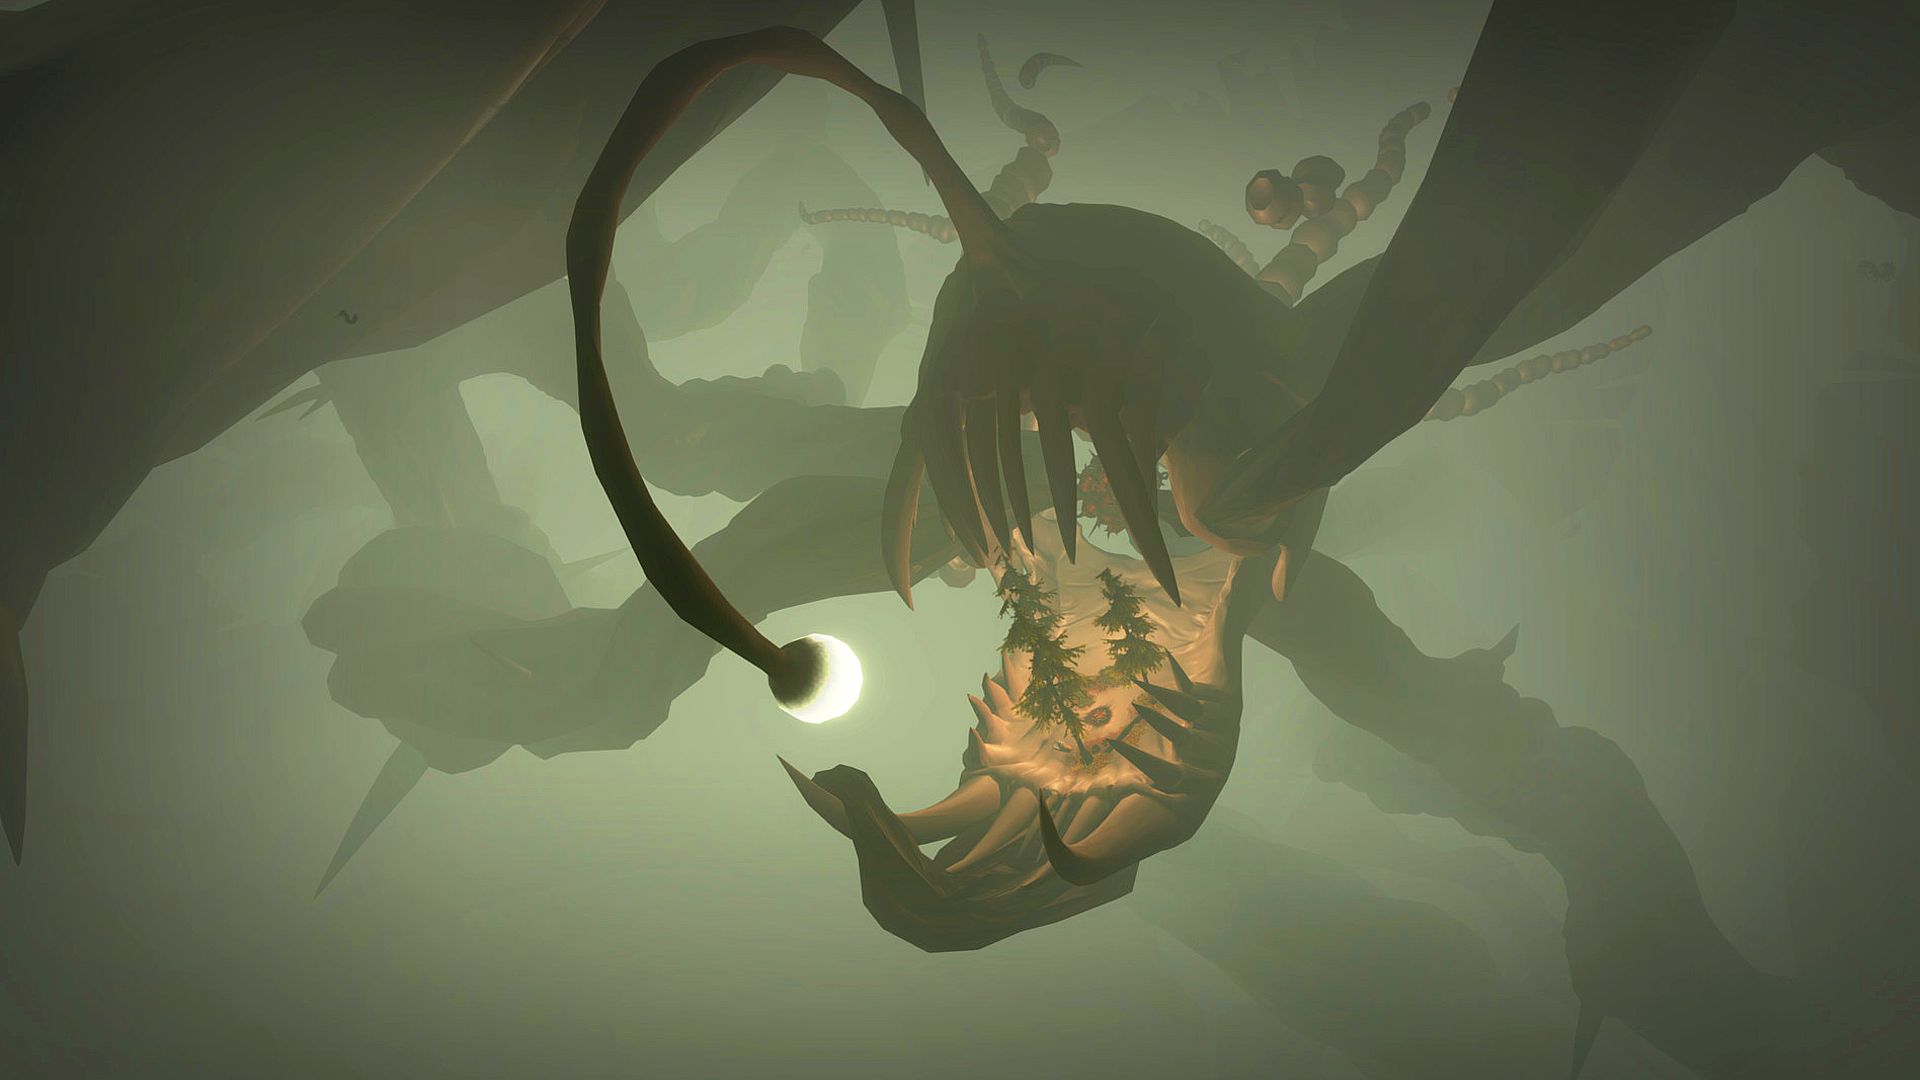 Best space games: Outer Wilds. Image shows a forest in a rock formation that looks like an angler fish.